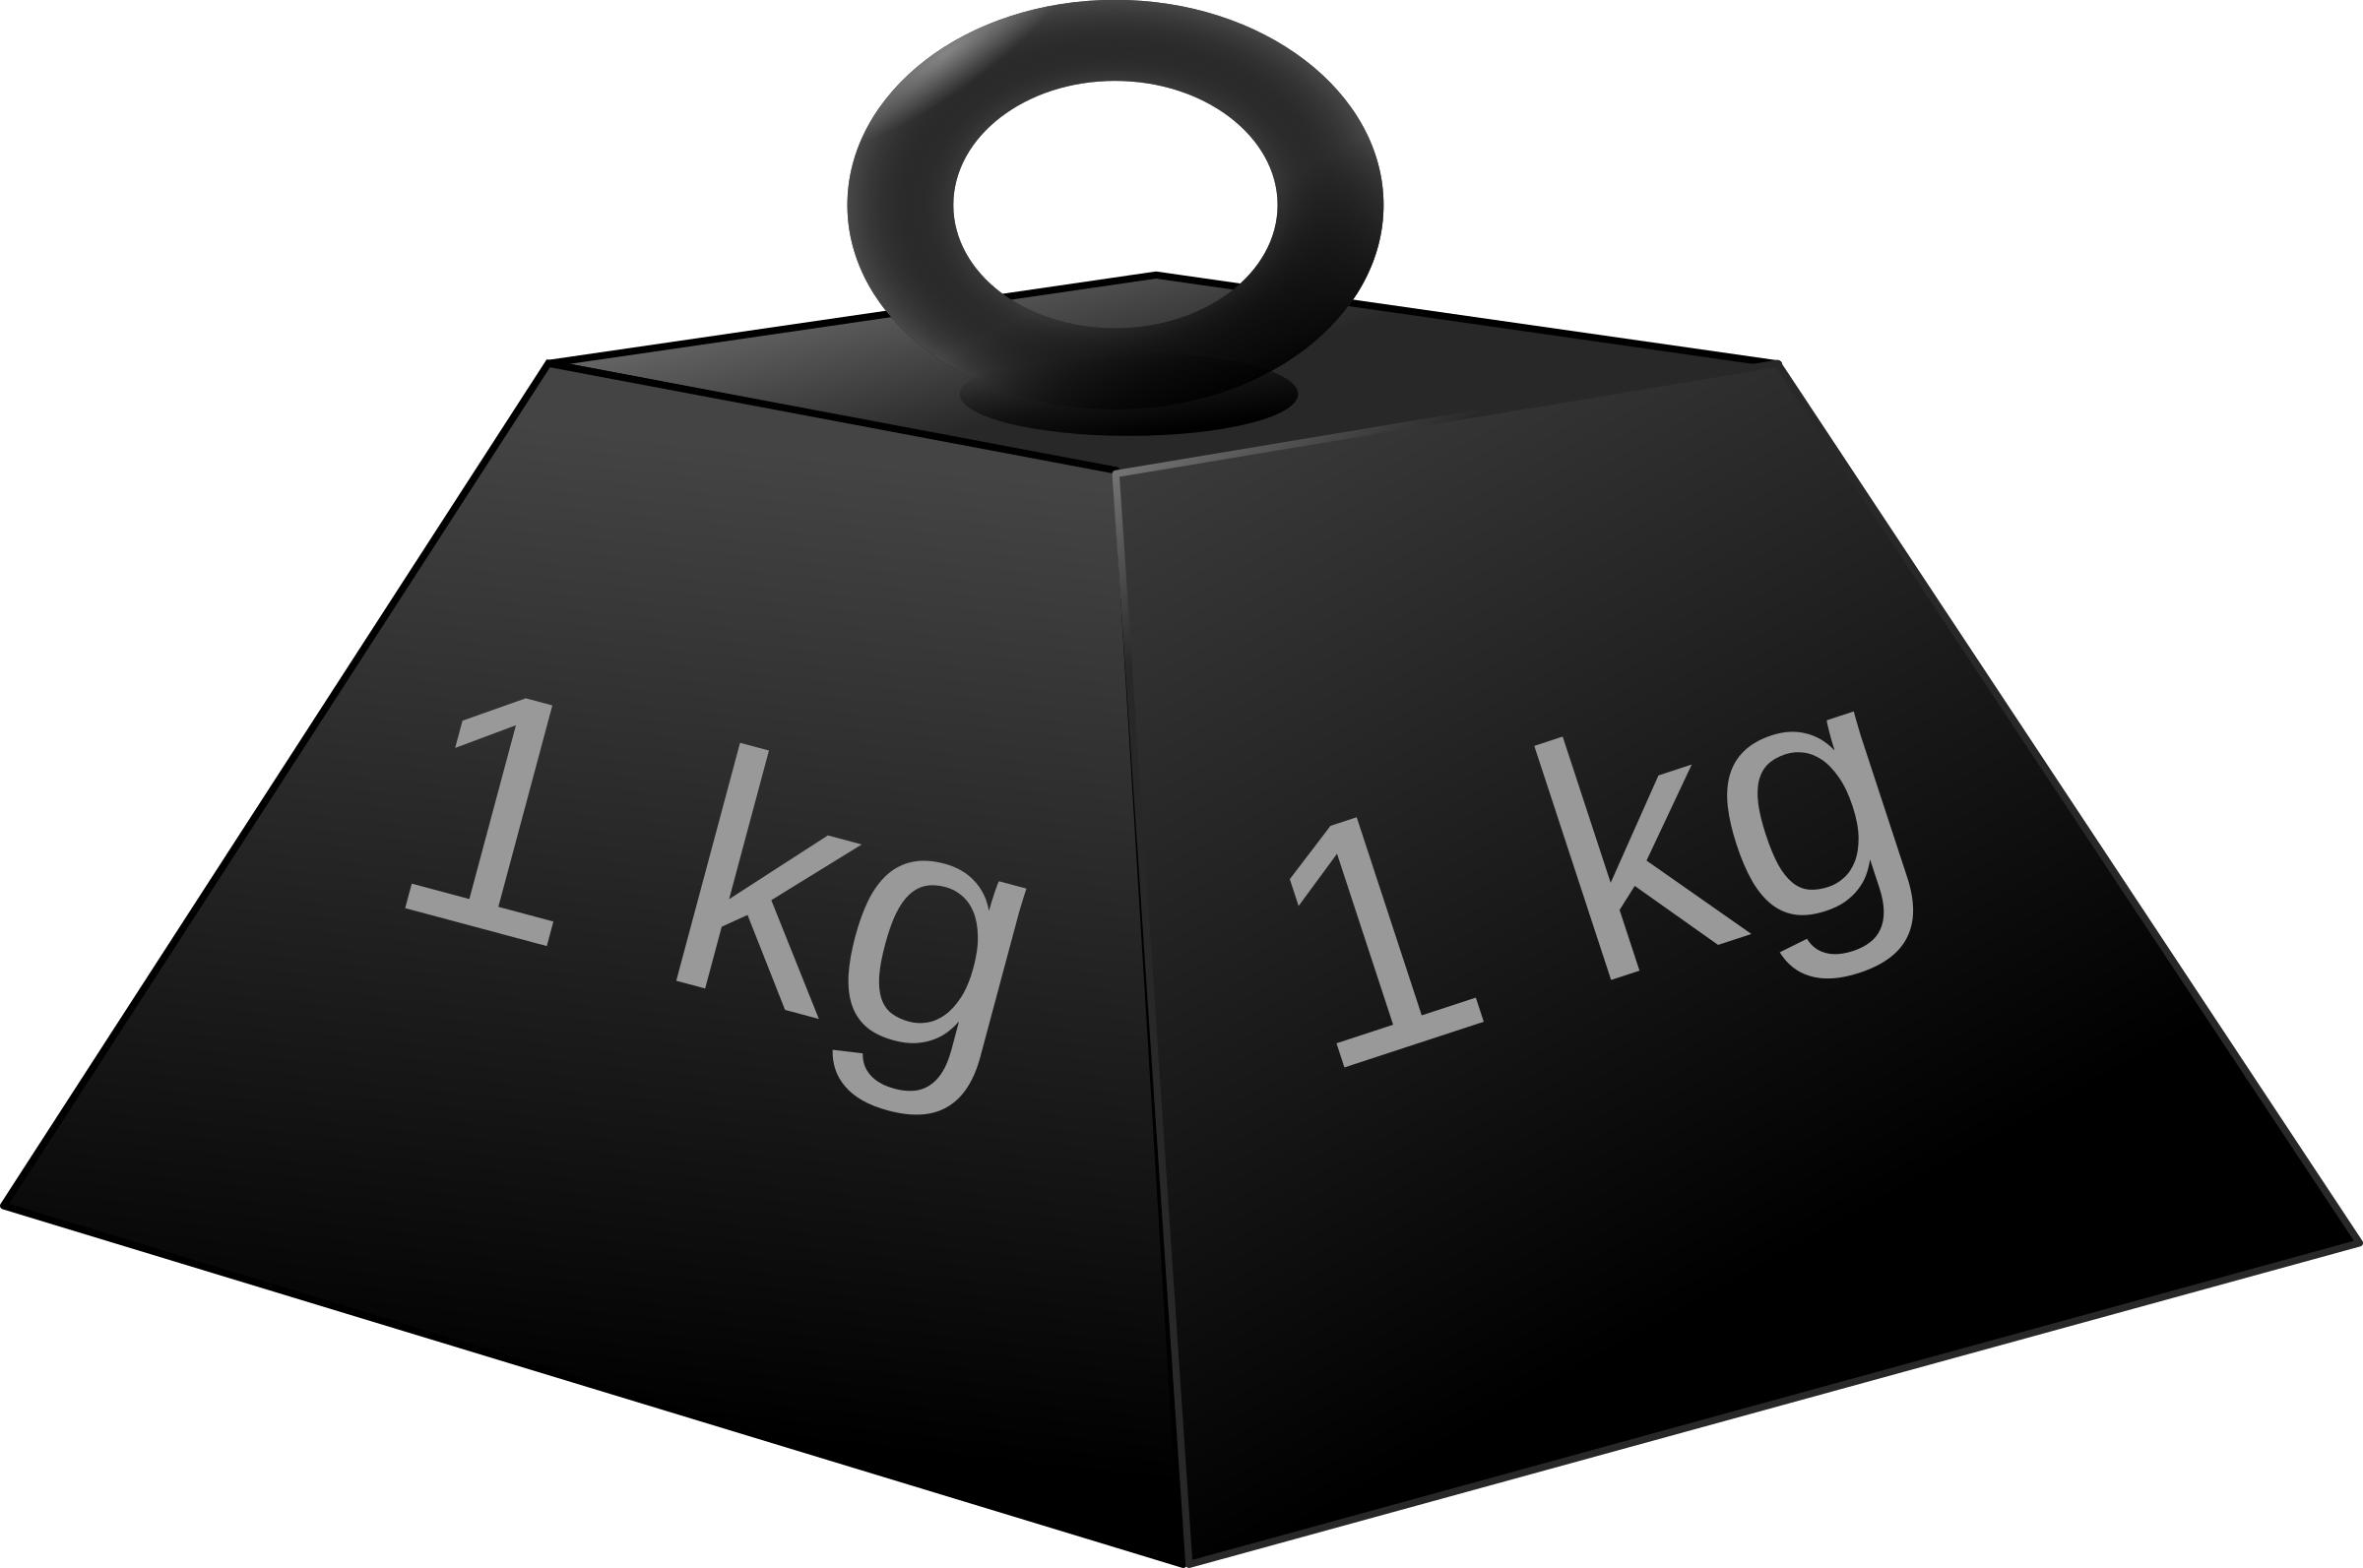 1kg weight png